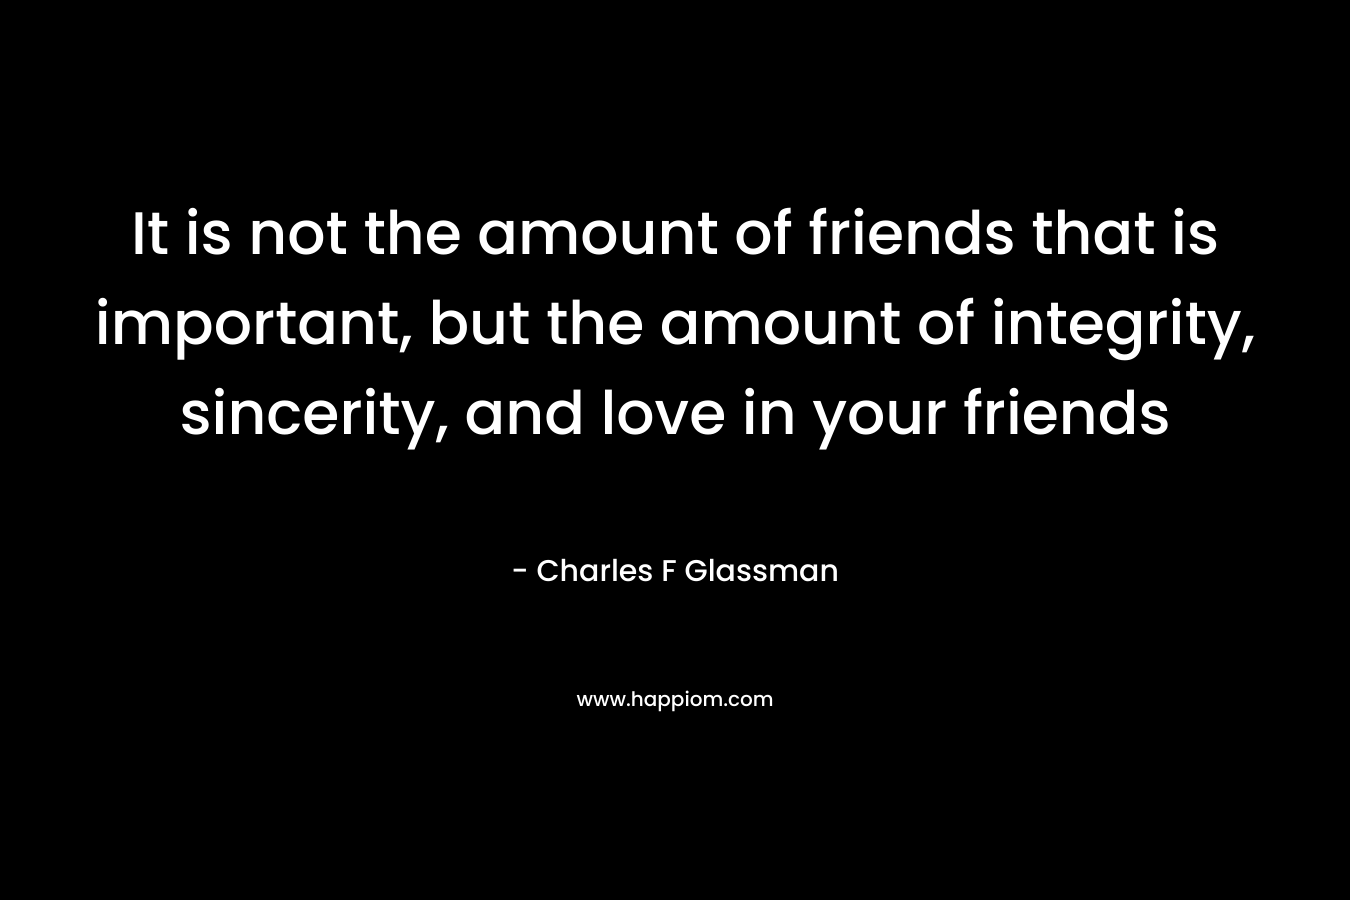 It is not the amount of friends that is important, but the amount of integrity, sincerity, and love in your friends